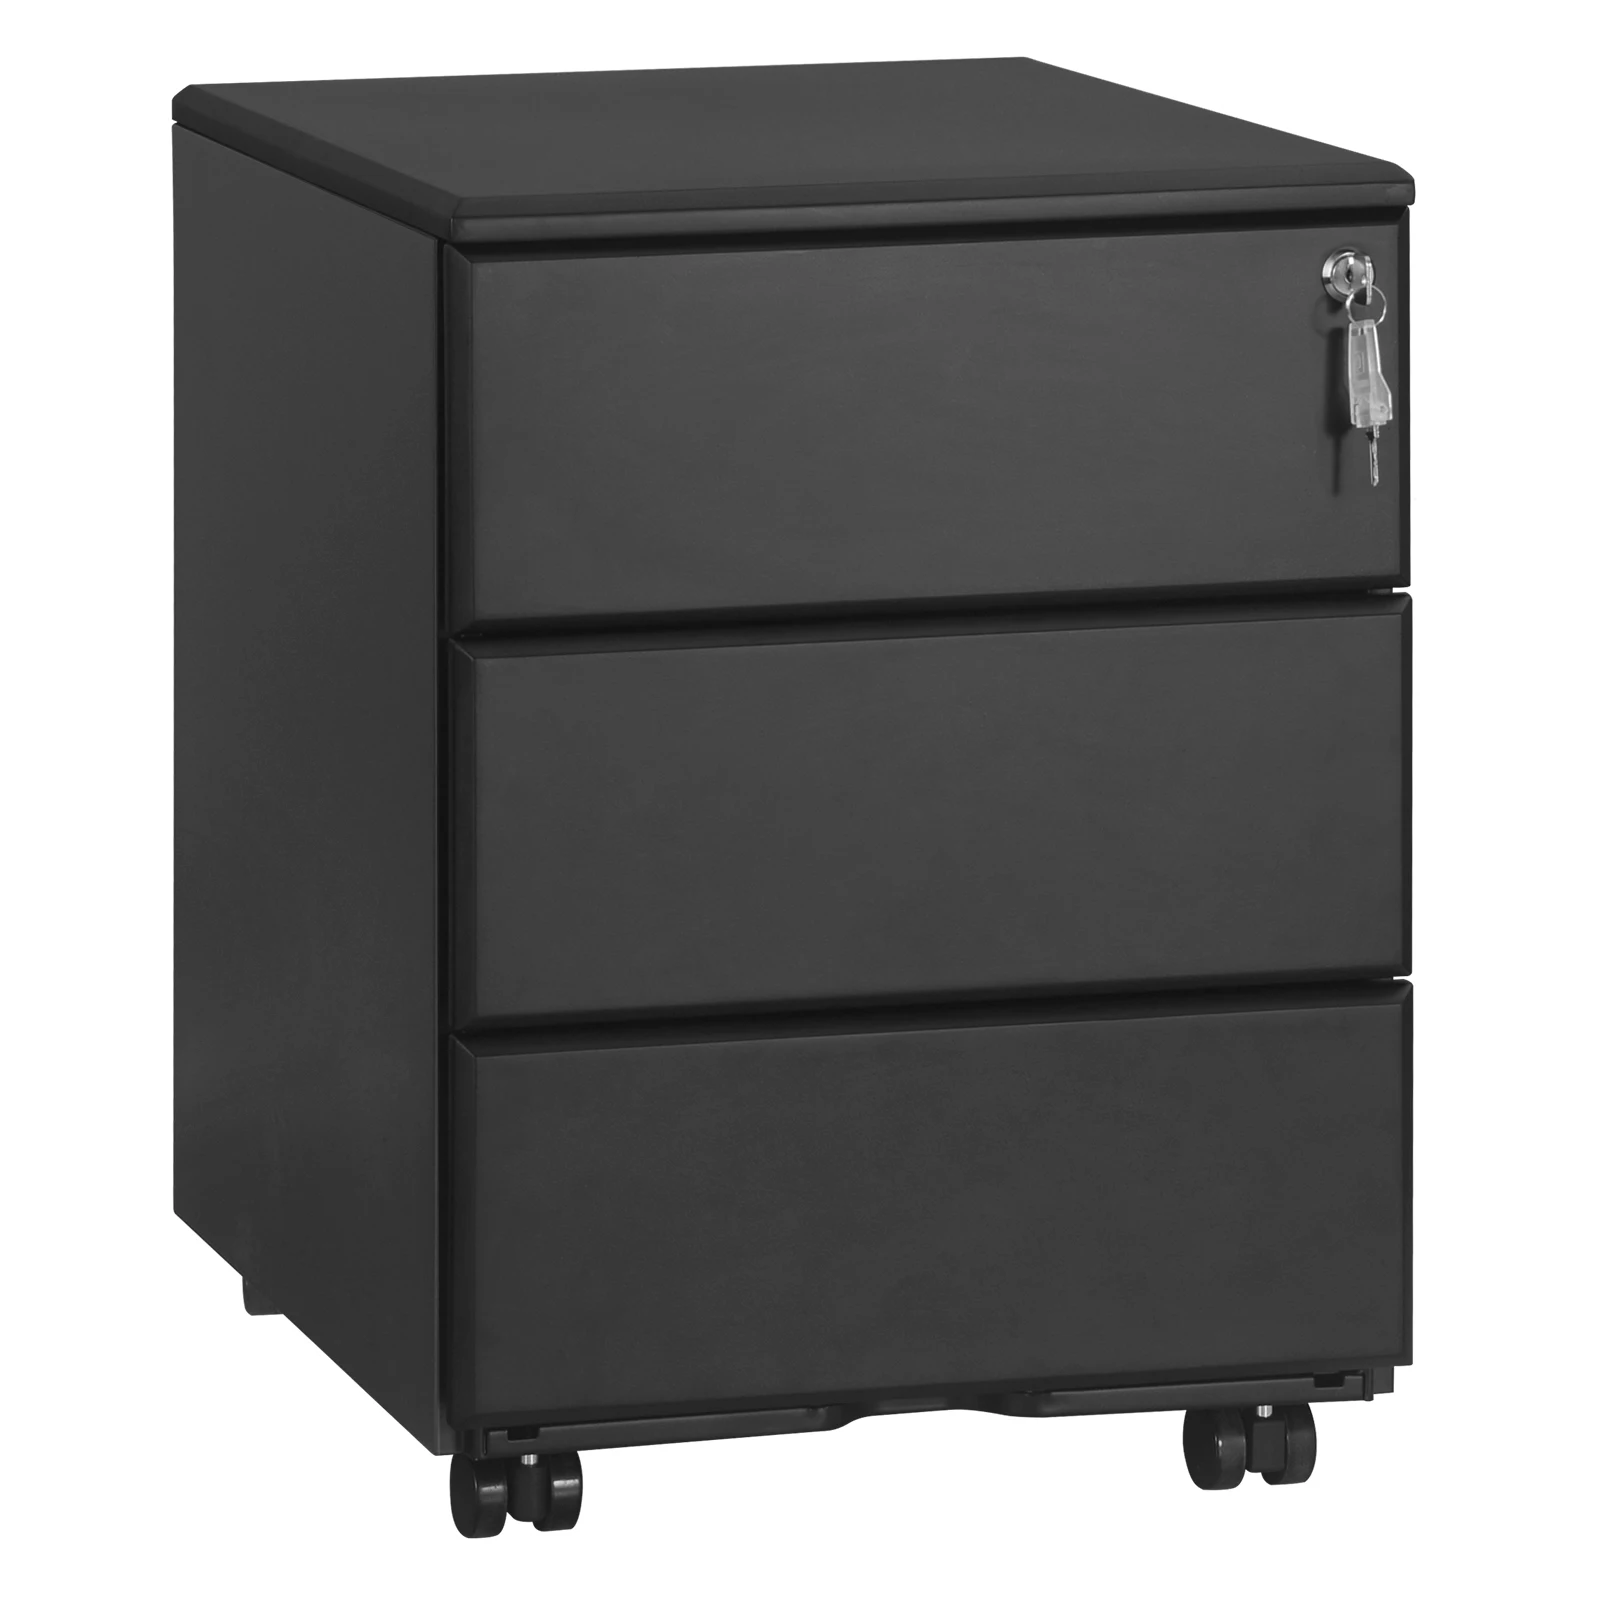 Mobile Filing Cabinet Office Cabinet With Drawers ...